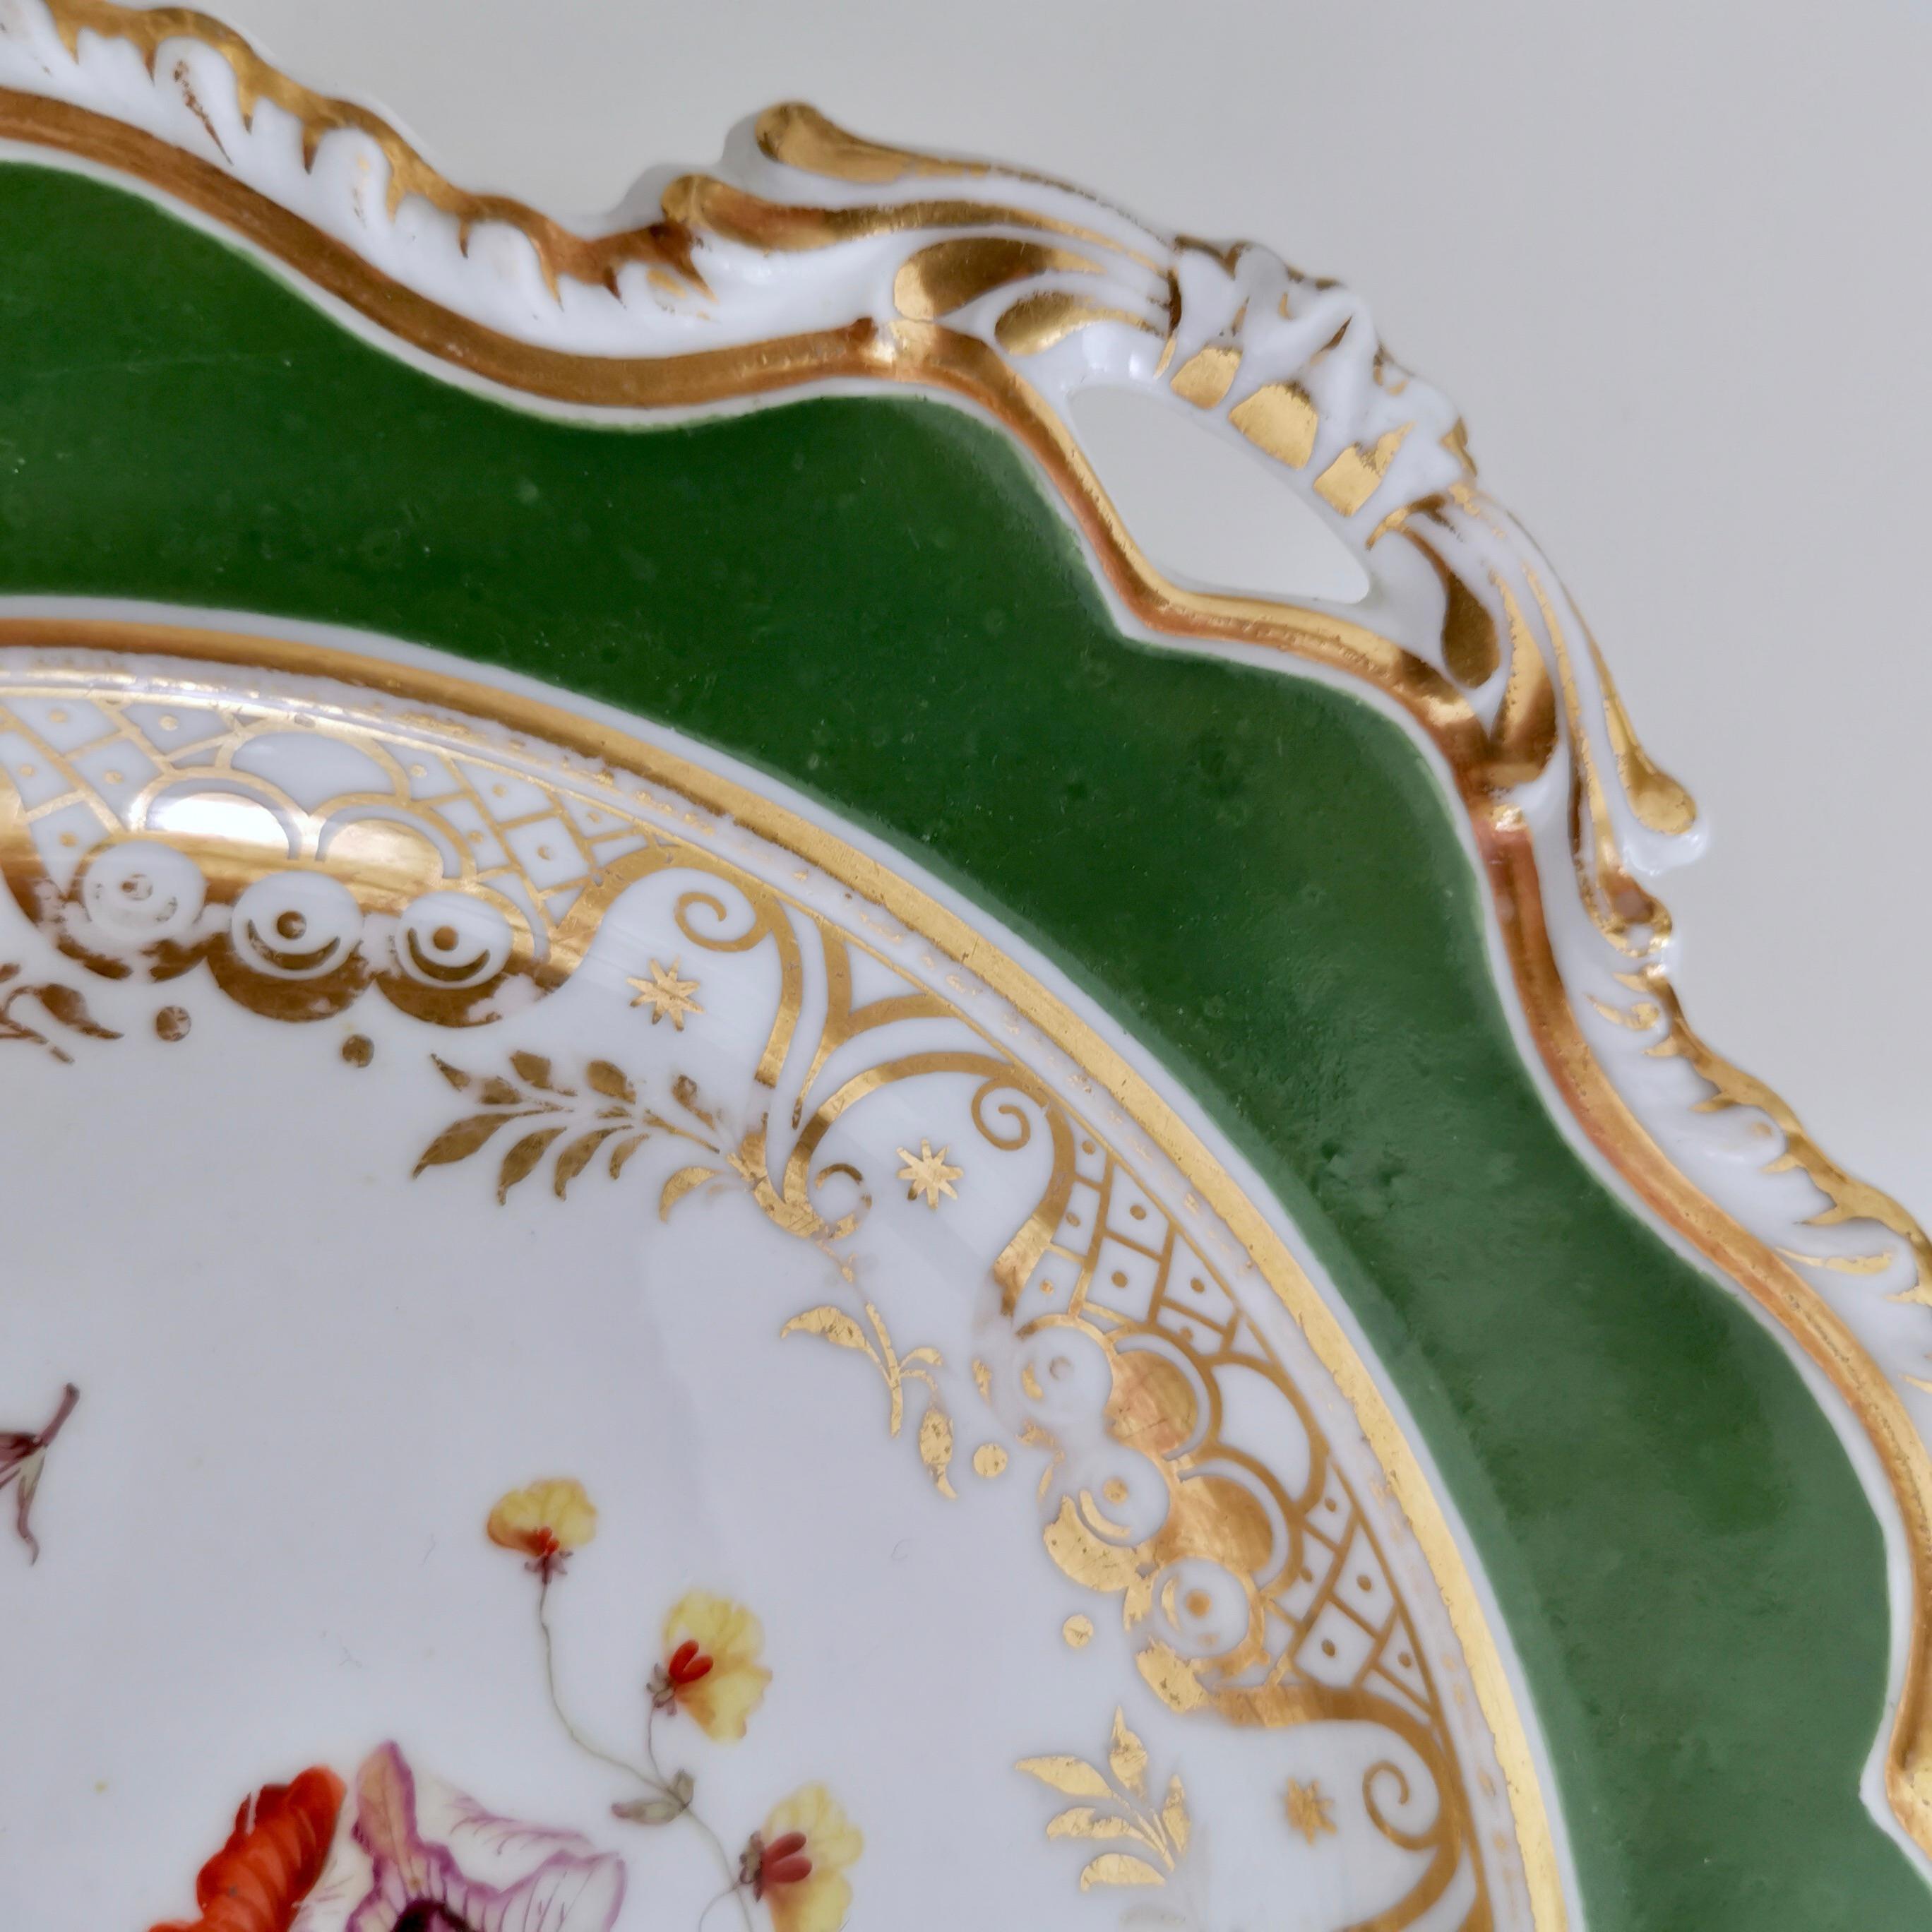 Ridgway Porcelain Plate, Green with Hand Painted Flowers, Regency, ca 1825 4